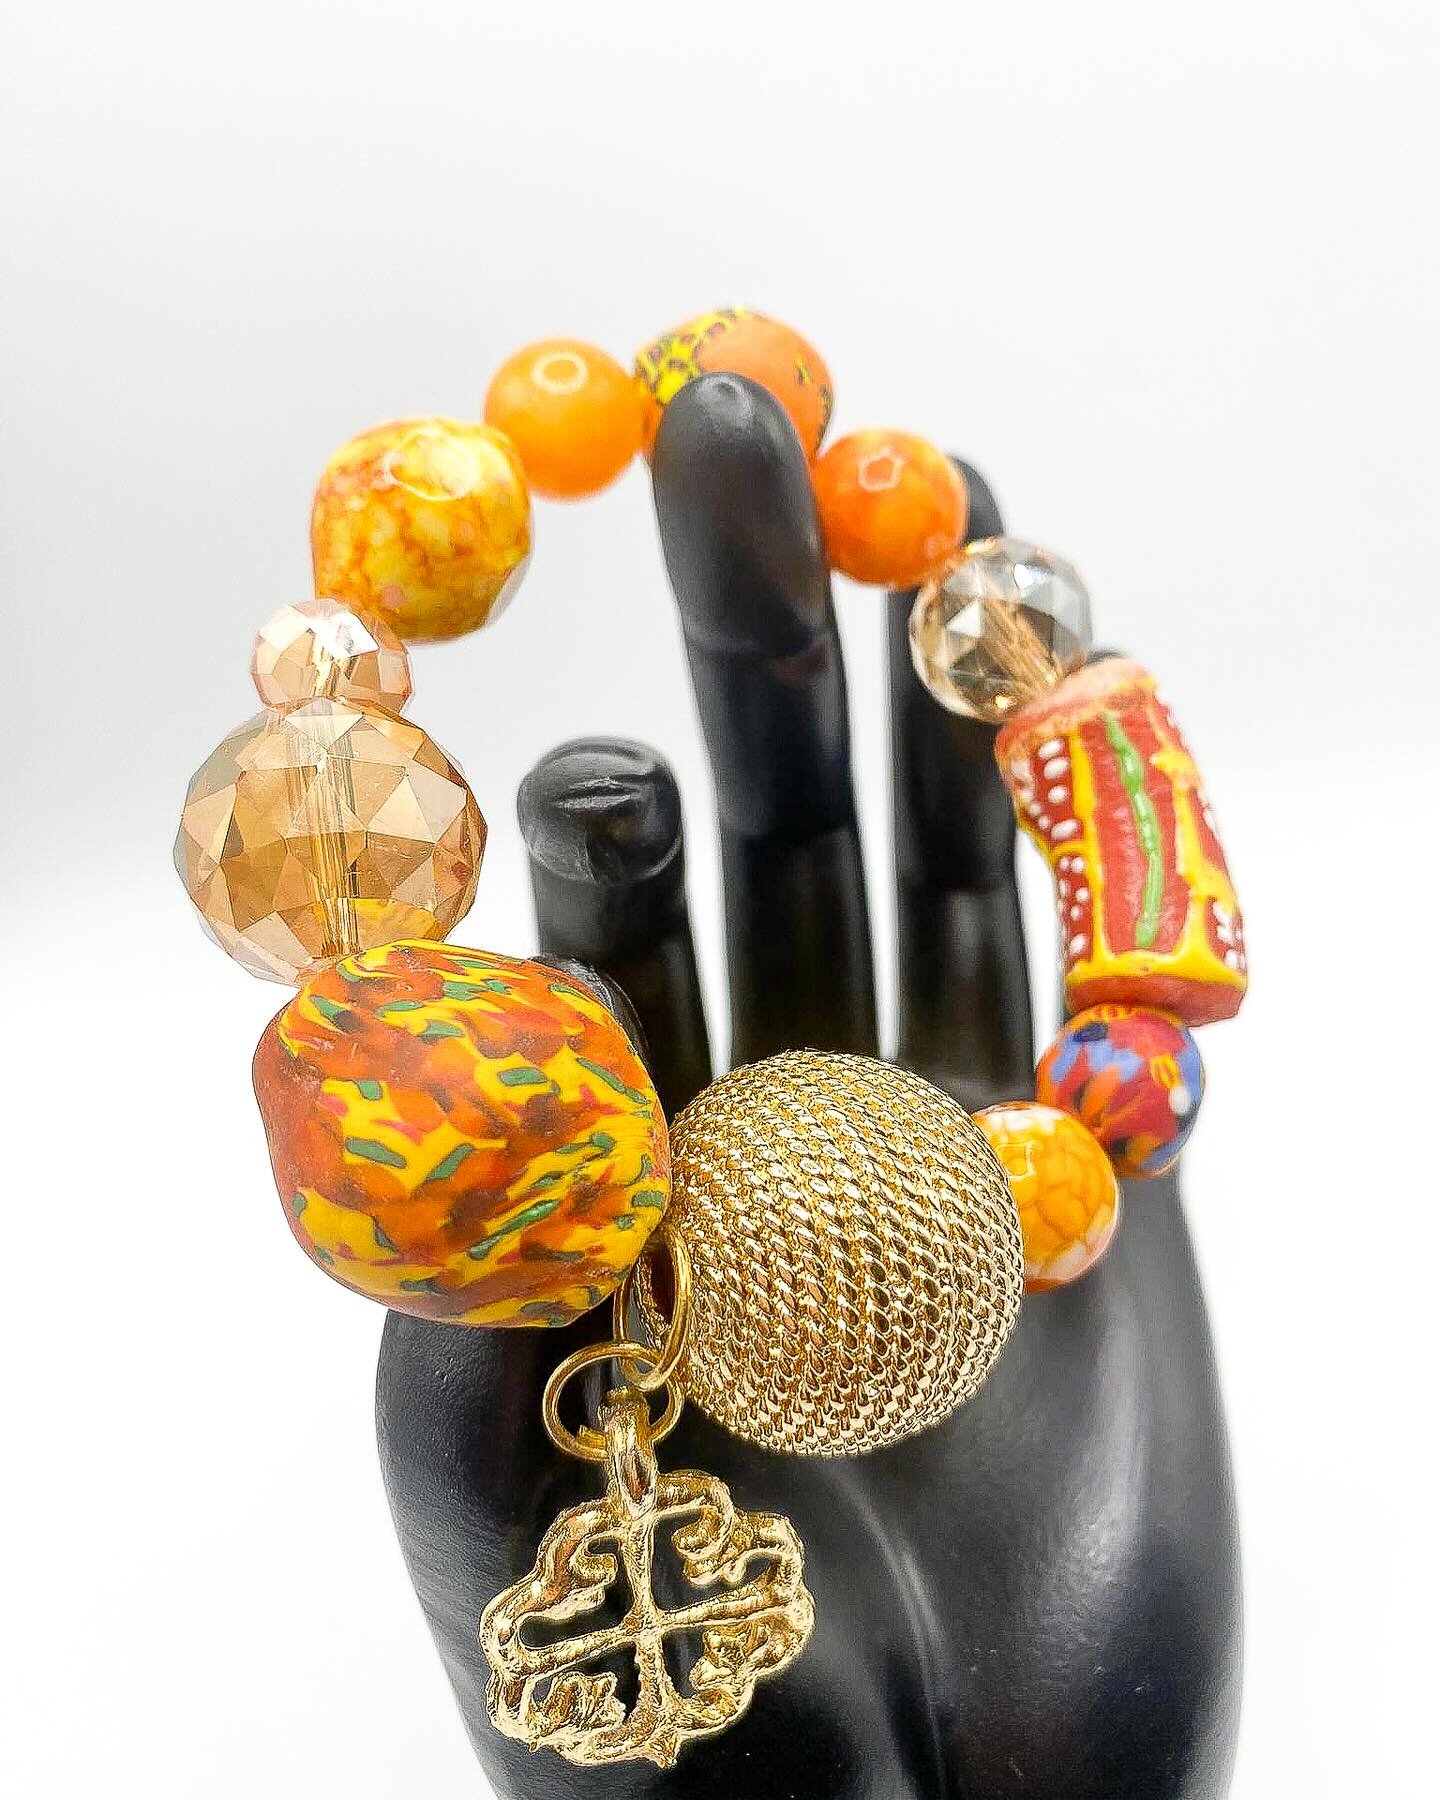 Our colorful Royal Adinkra bracelet whispers stories of tradition and elegance. Elevate your style with a touch of African royalty👌🏽🤩 

📍Website link: www.nsapacollections.com
.
.
.
#nsapacollections #handmadejewelry #madewithlove #royalbracelets